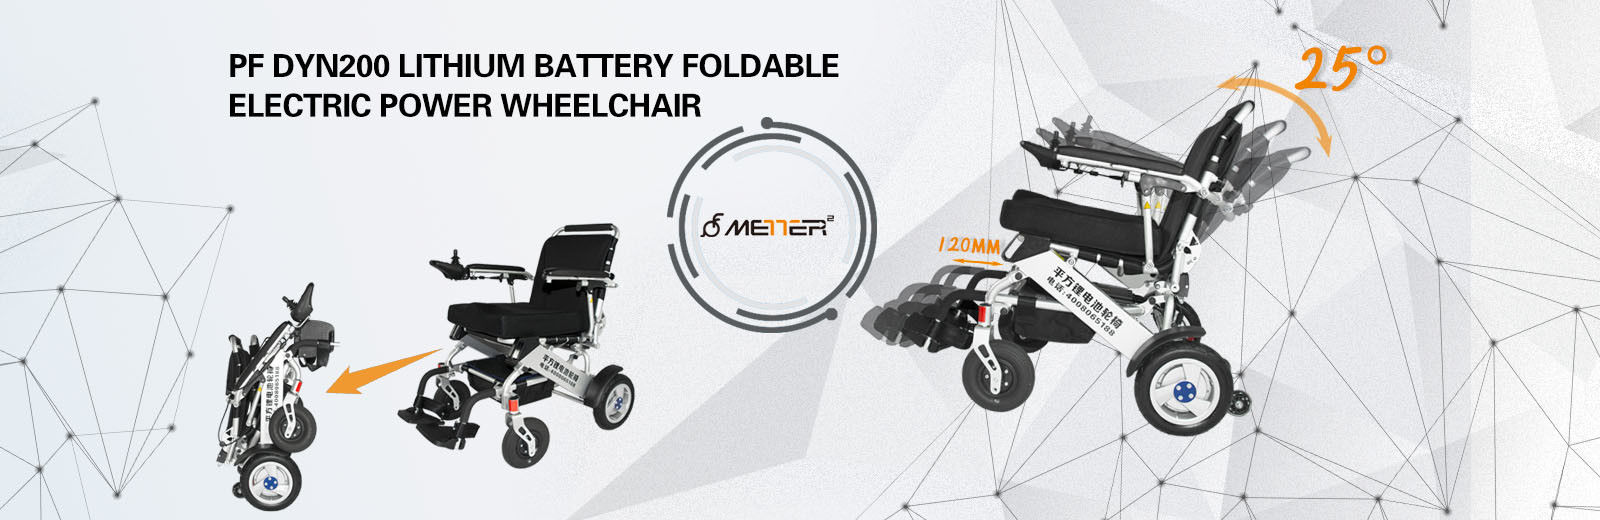 Portable Foldable Electric Wheelchair